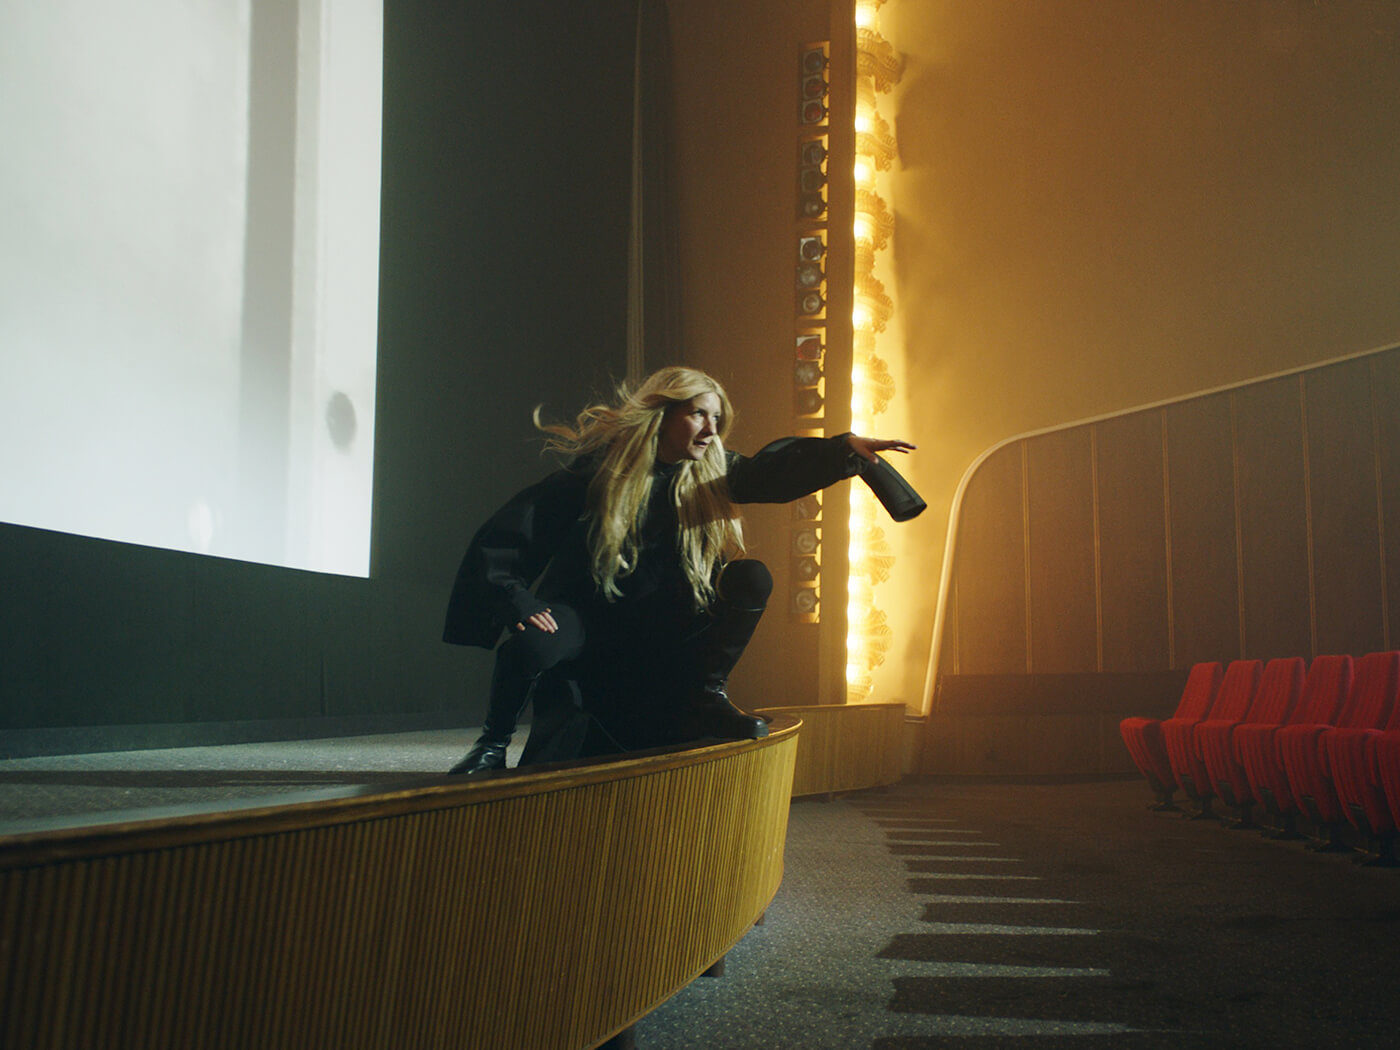 Still of Jonna Lee, the artist behind iamamiwhoami, from the ‘Changes’ music video